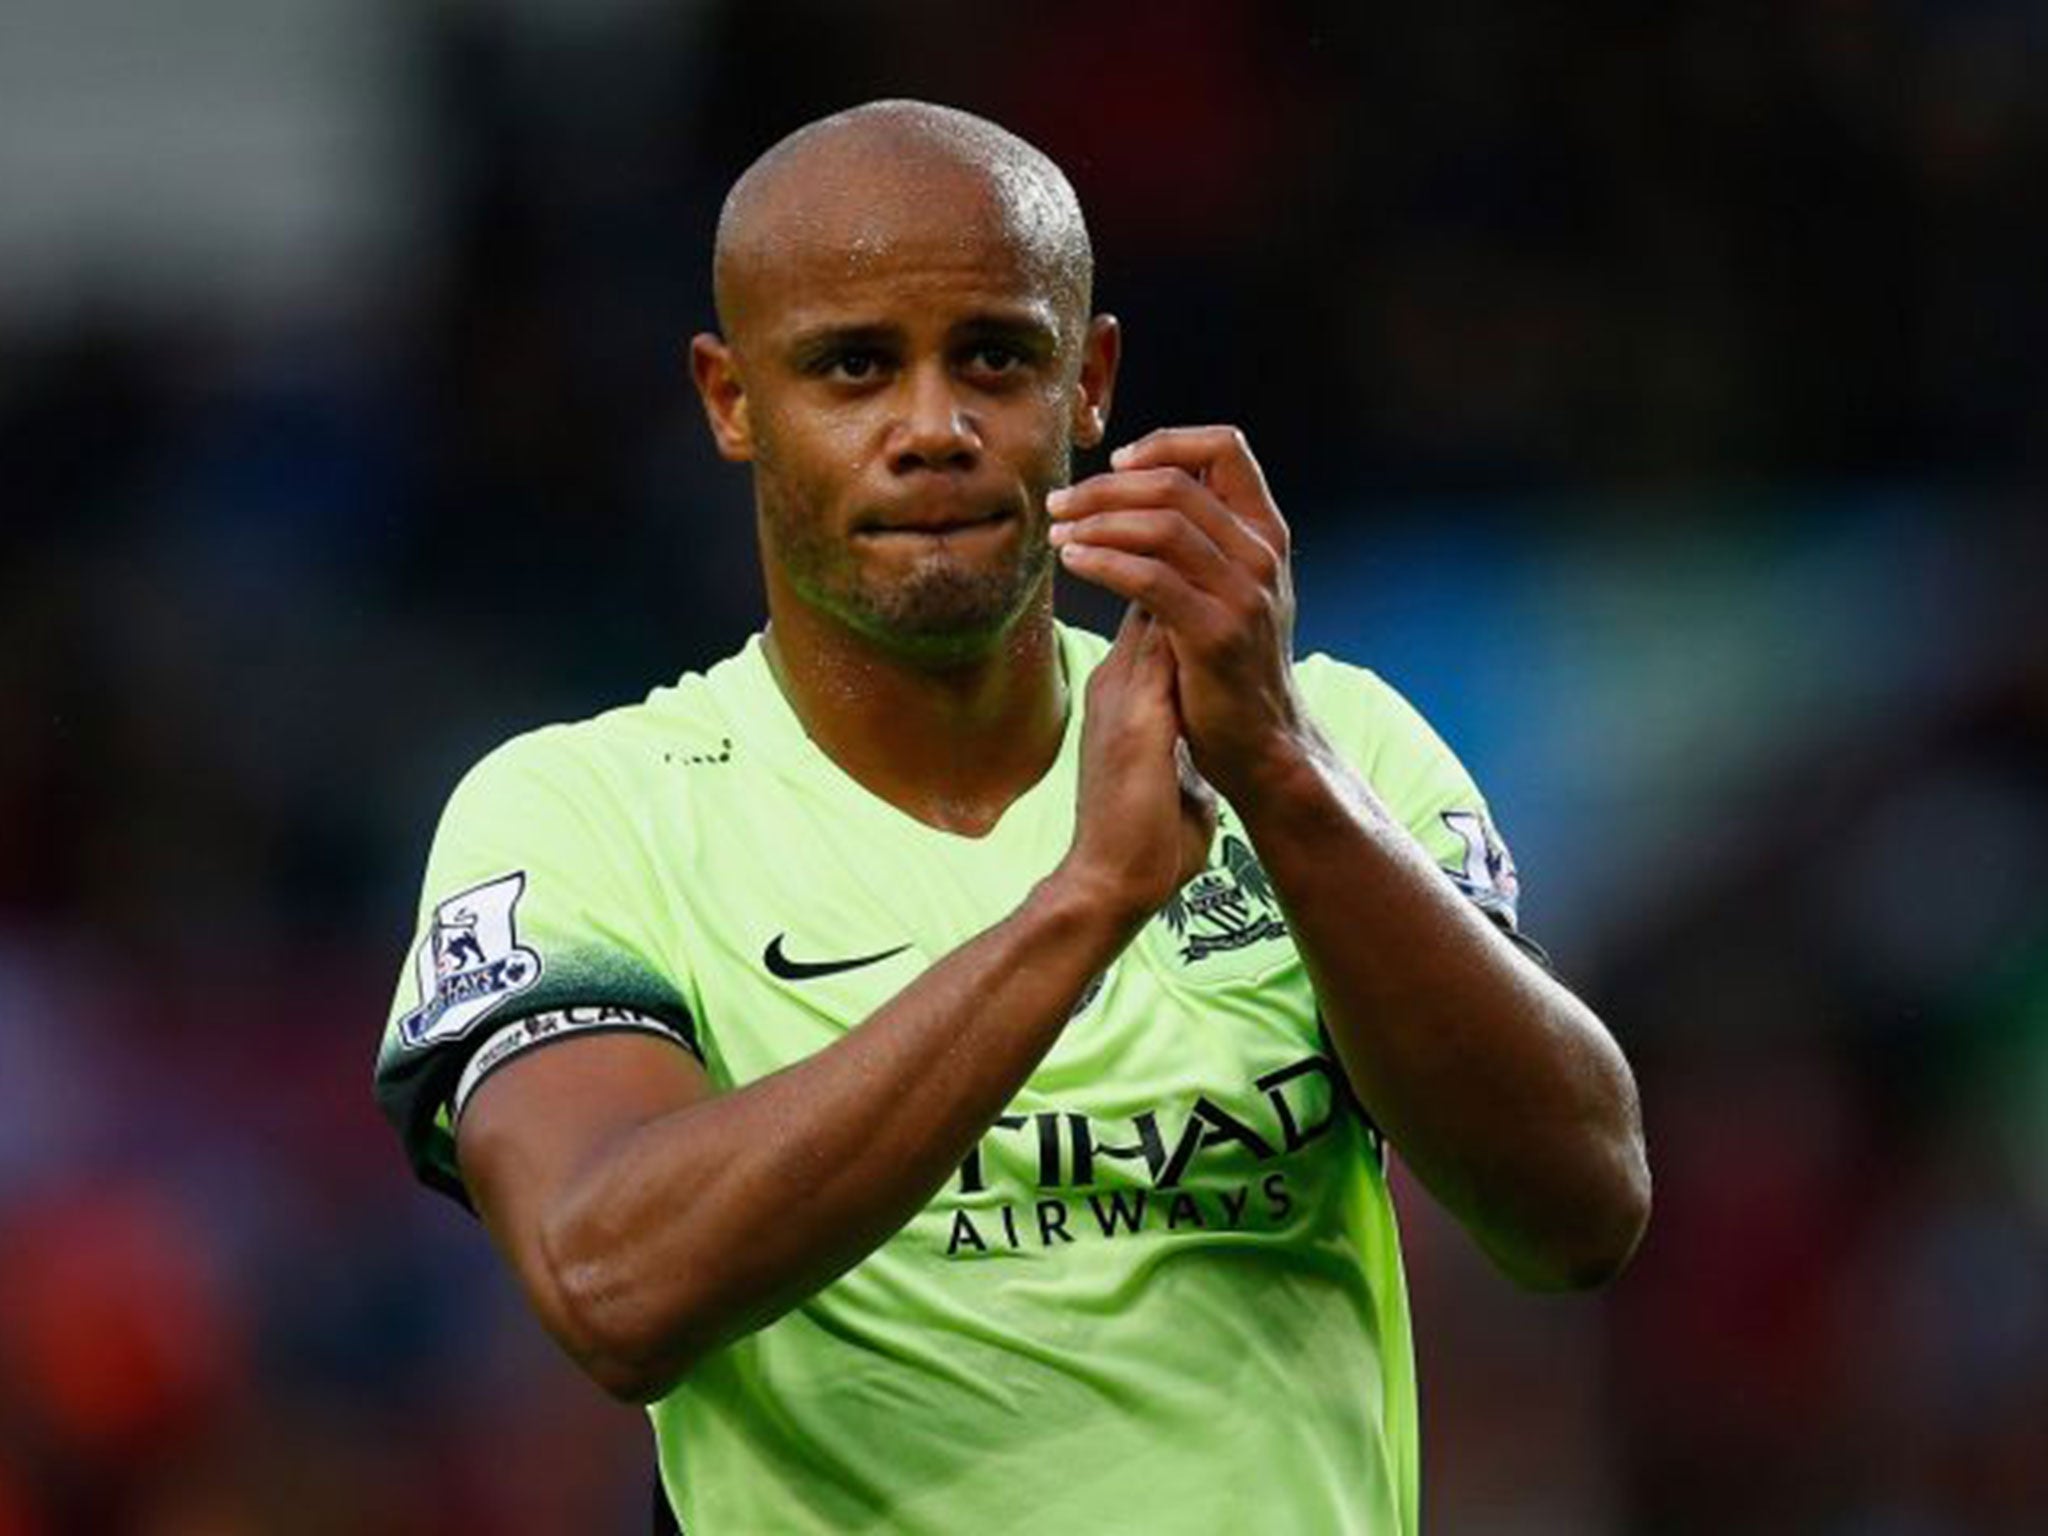 City have not lost this season with Vincent Kompany in side